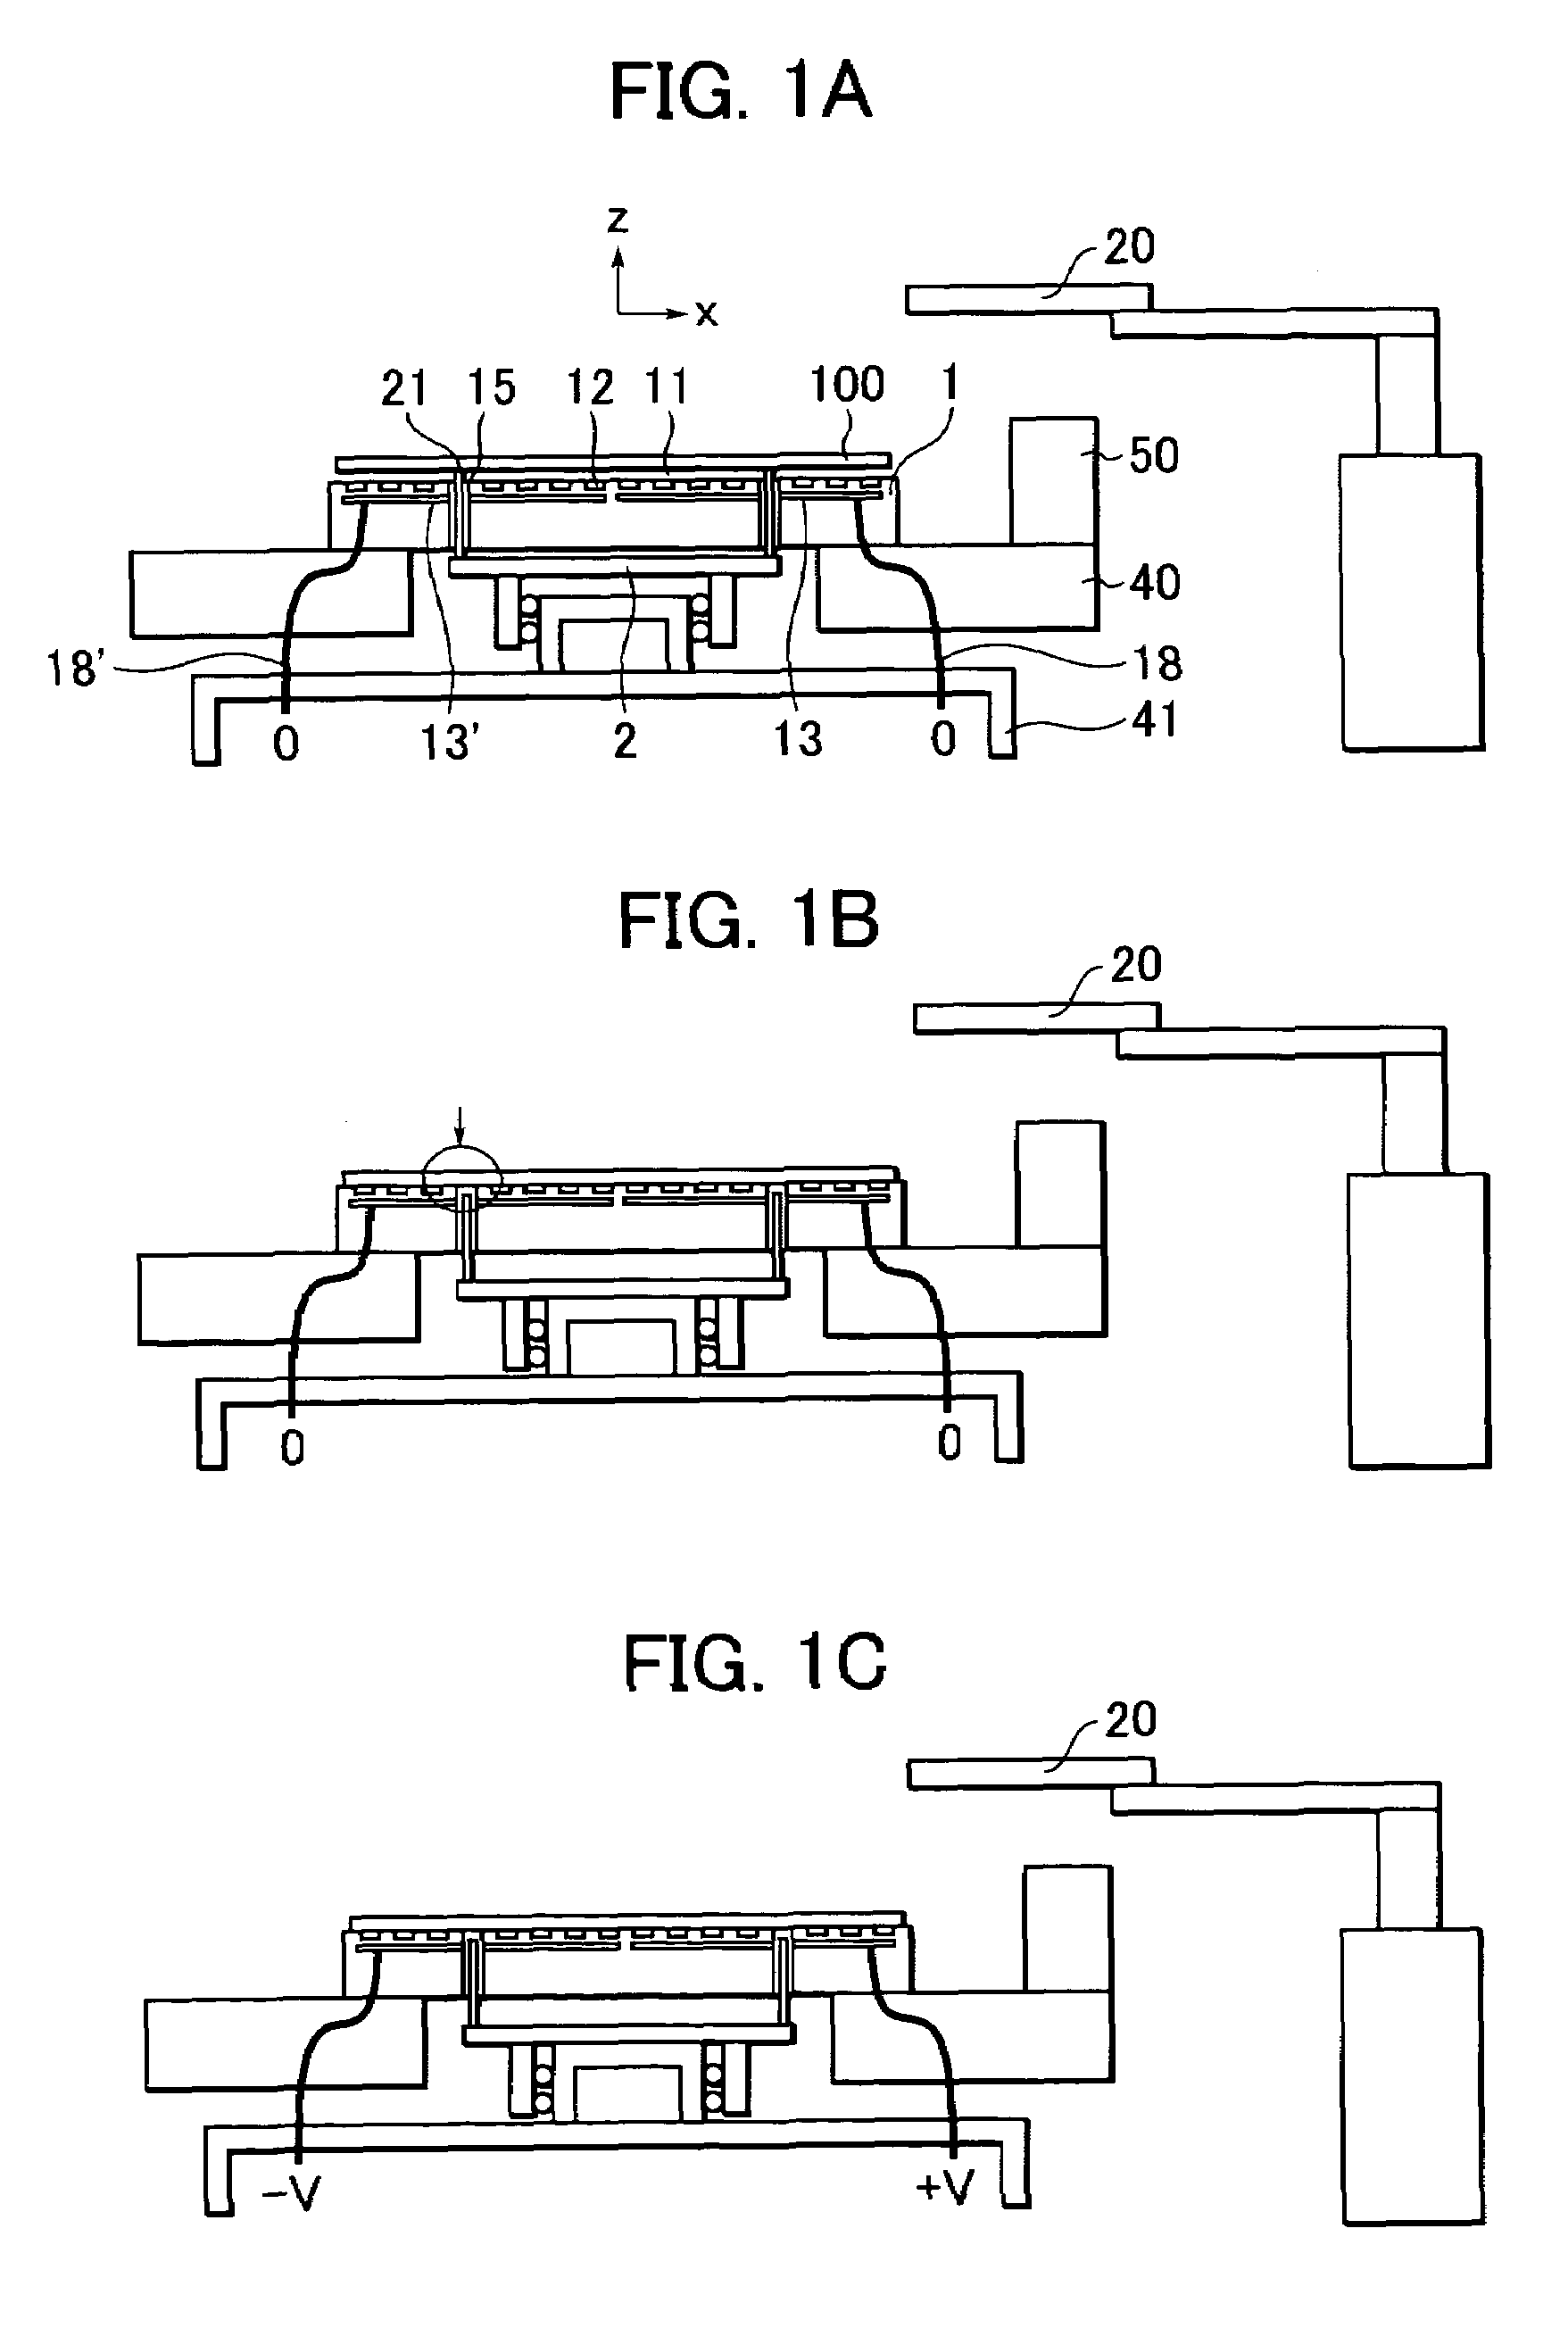 Substrate holding device, substrate processing apparatus using the same, and method for aligning and holding substrate